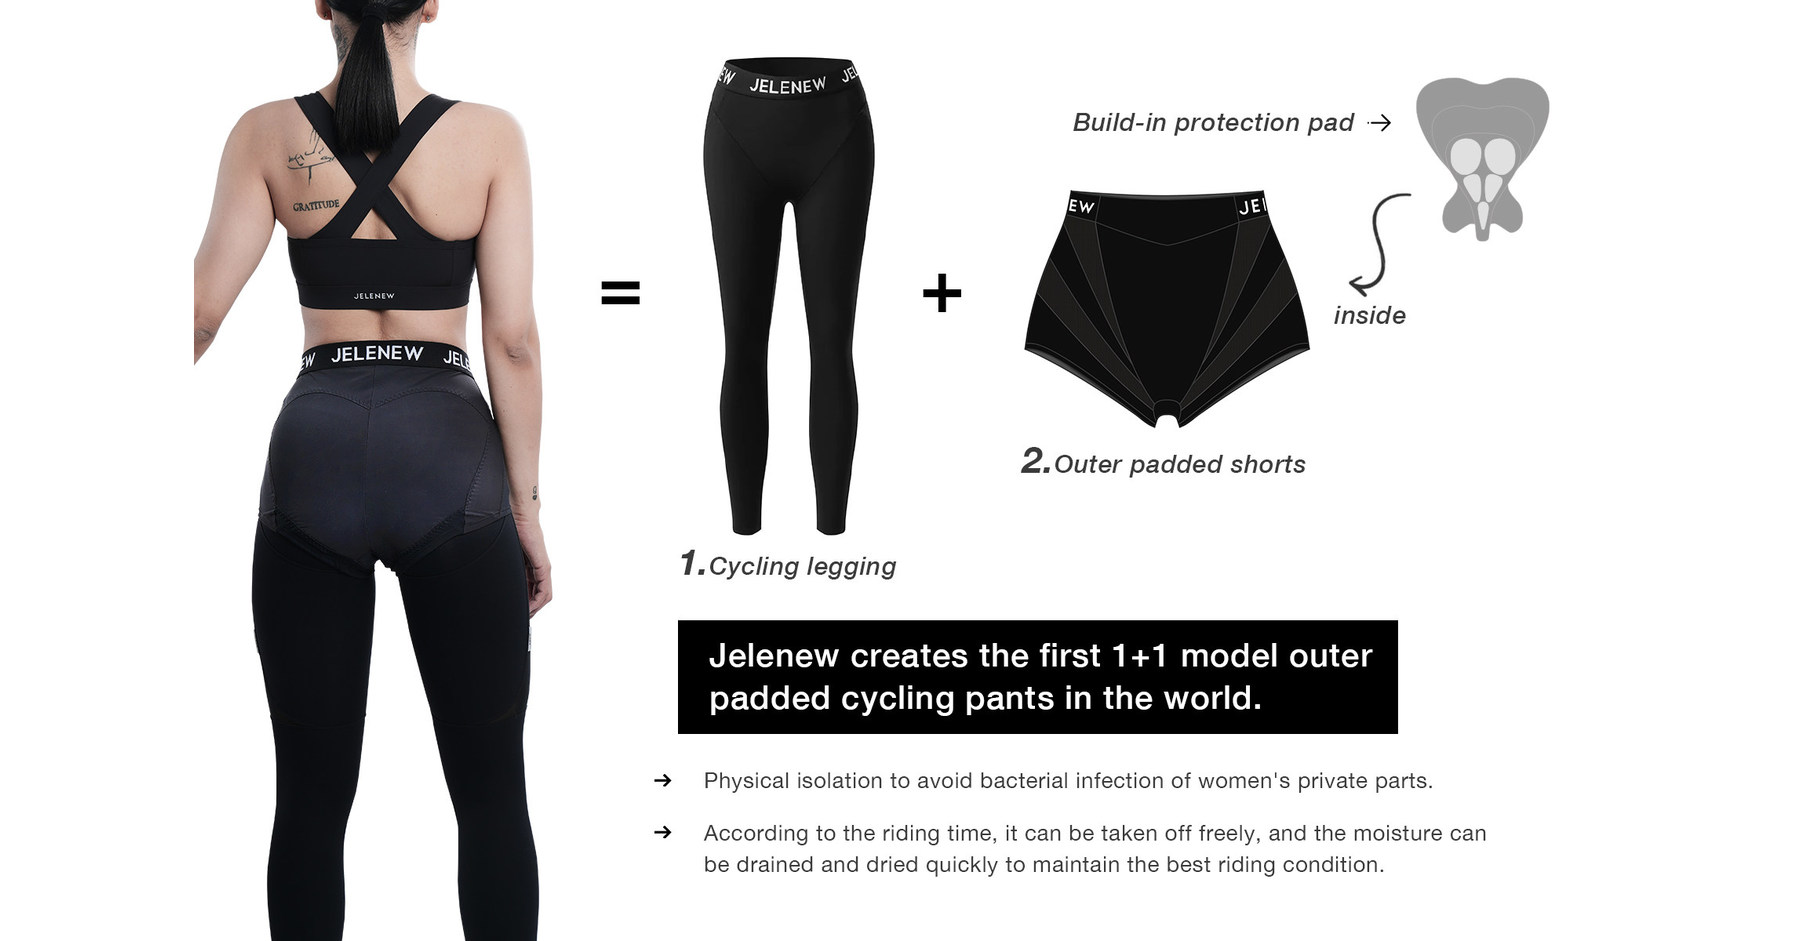 https://mma.prnewswire.com/media/1818622/Jelenew_creates_the_first_1_1_model_outer_padded_cycling_pants_in_the_world.jpg?p=facebook